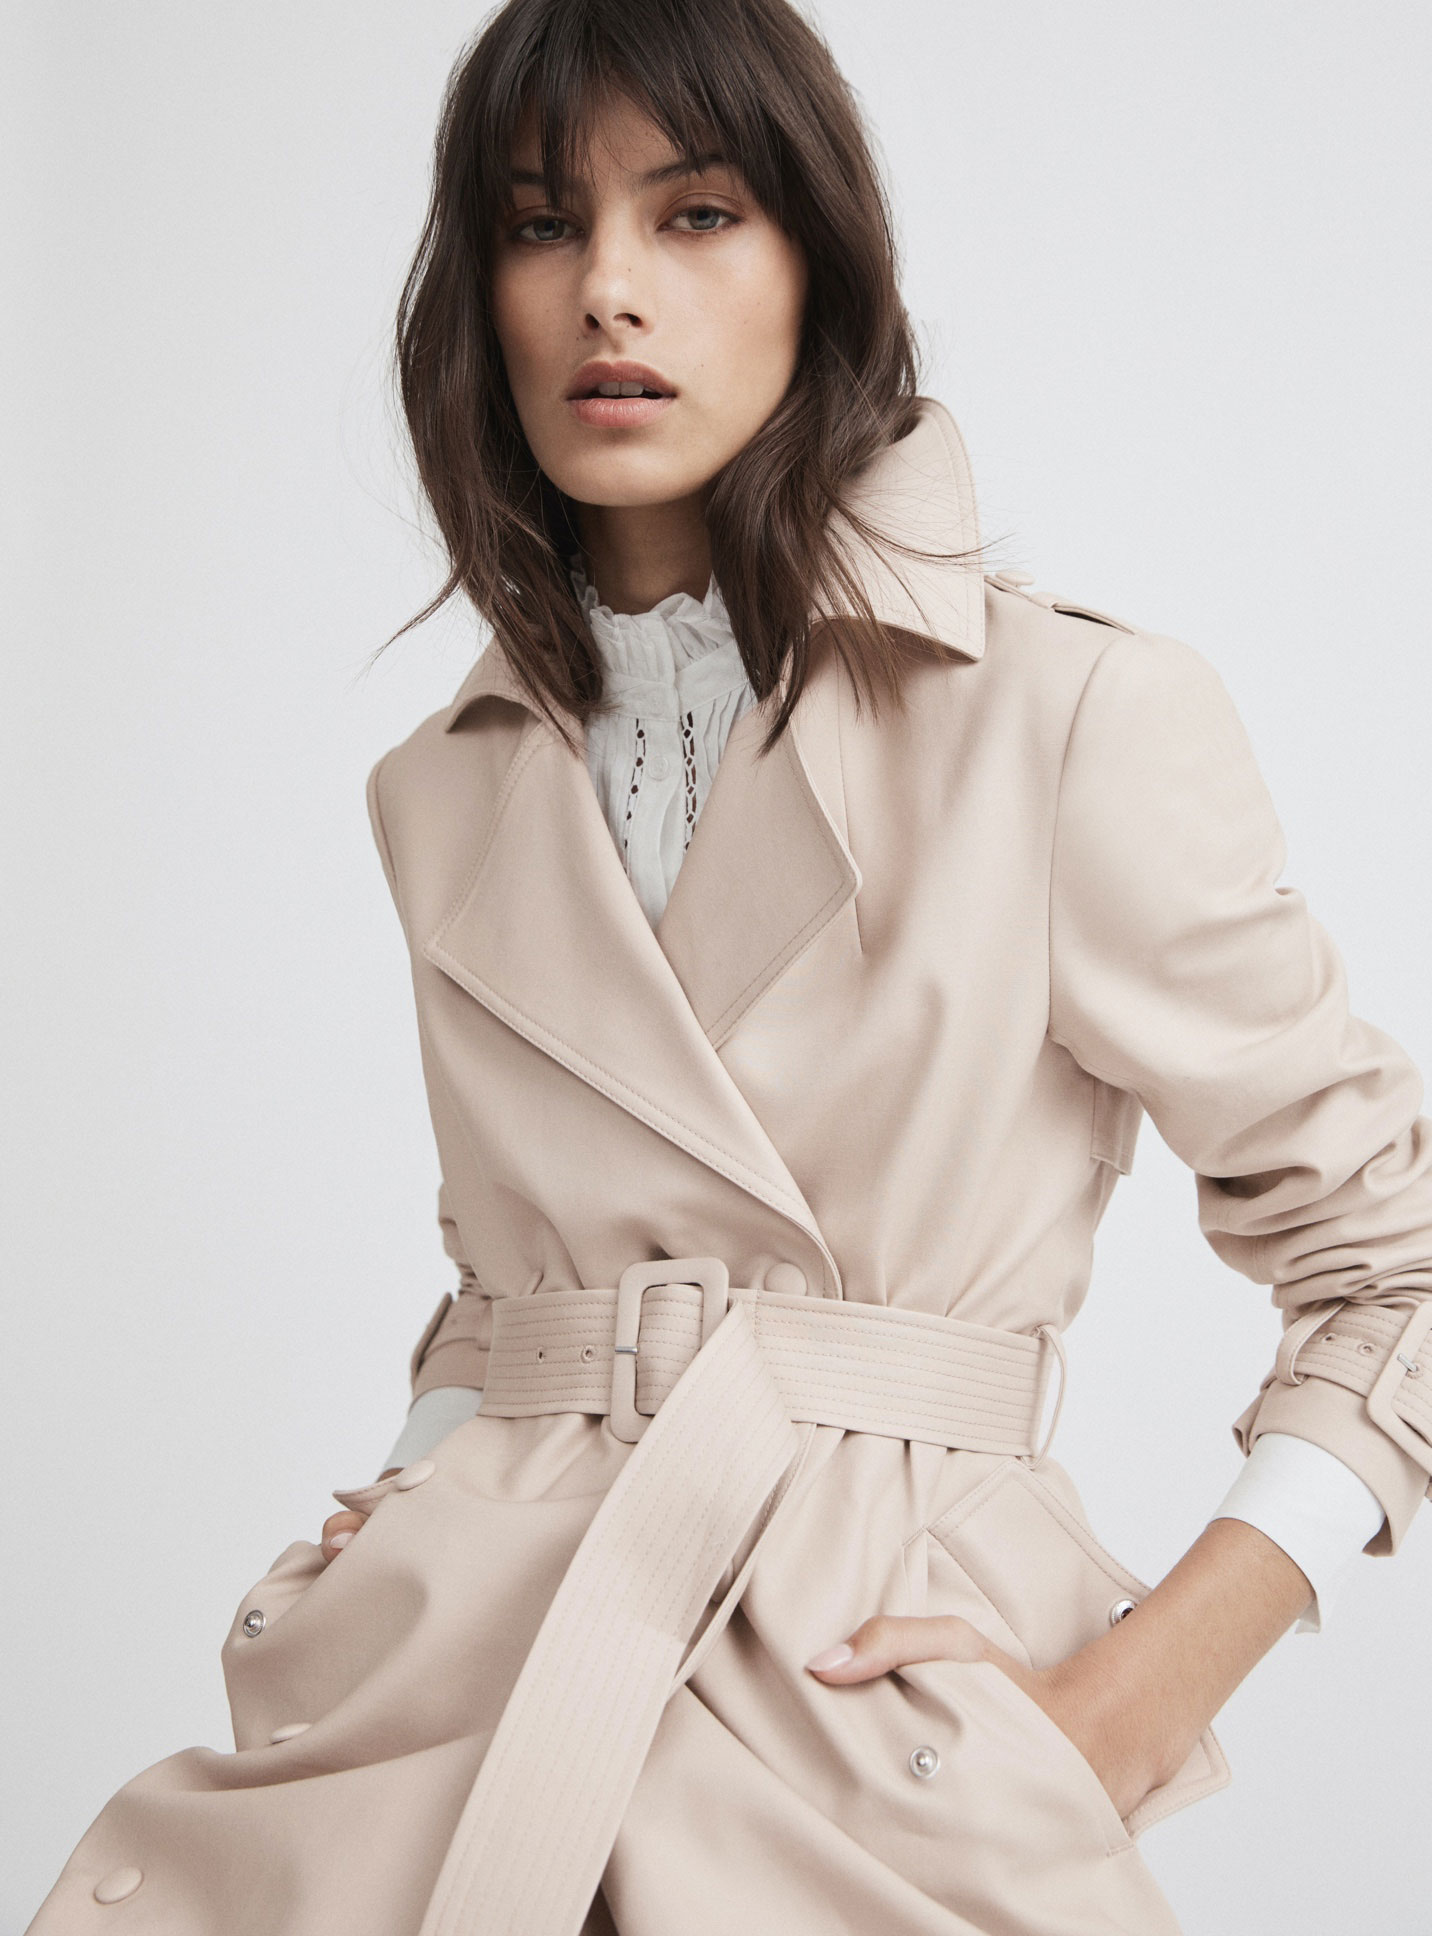 How To Wear A Women's Trench Coat - Witchery Style Tips